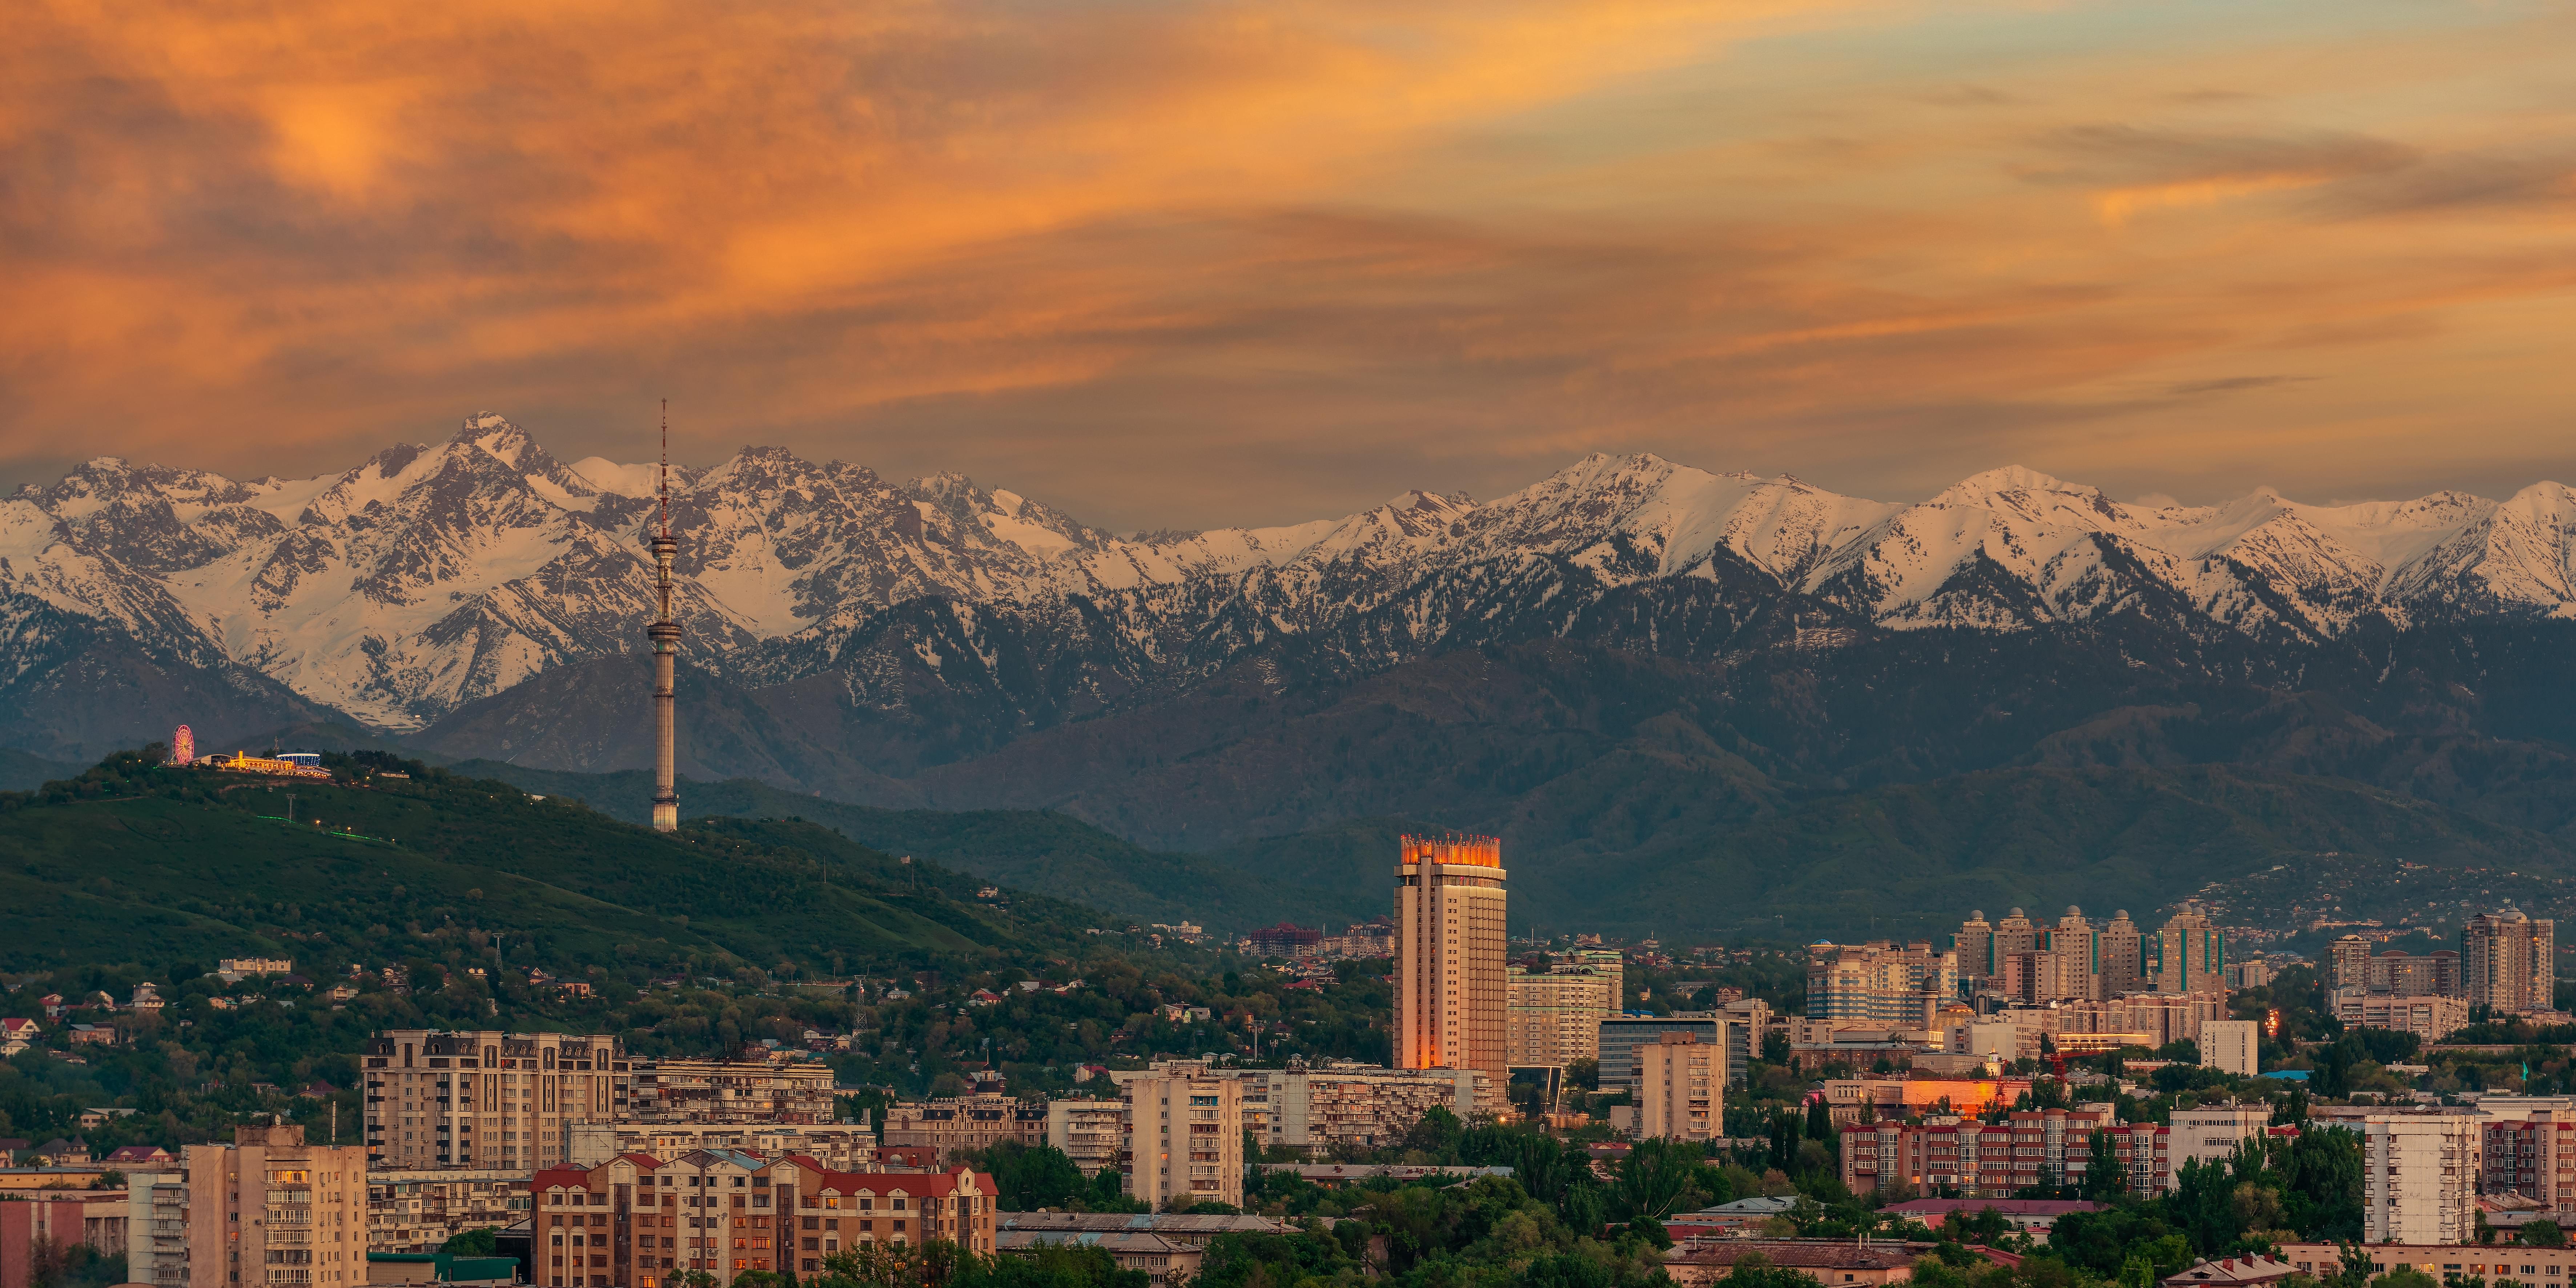 Things to Do in Almaty